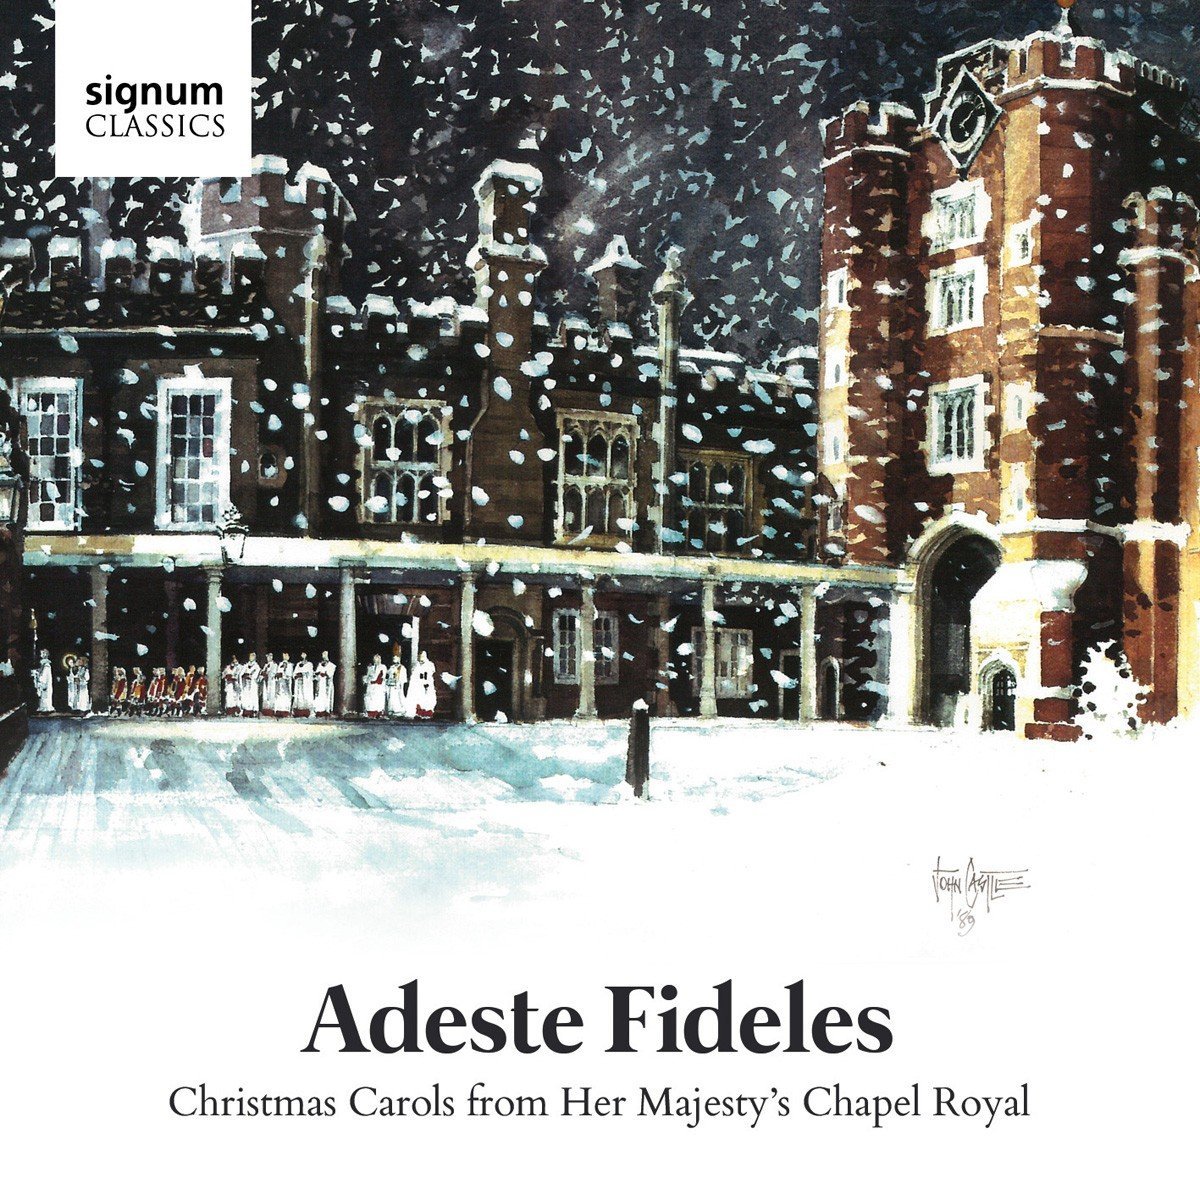 Huw Williams & Choir of the Chapel Royal – Adeste Fideles: Christmas Carols from her Majesty’s Chapel Royal (2016) [HDTracks FLAC 24bit/96kHz]